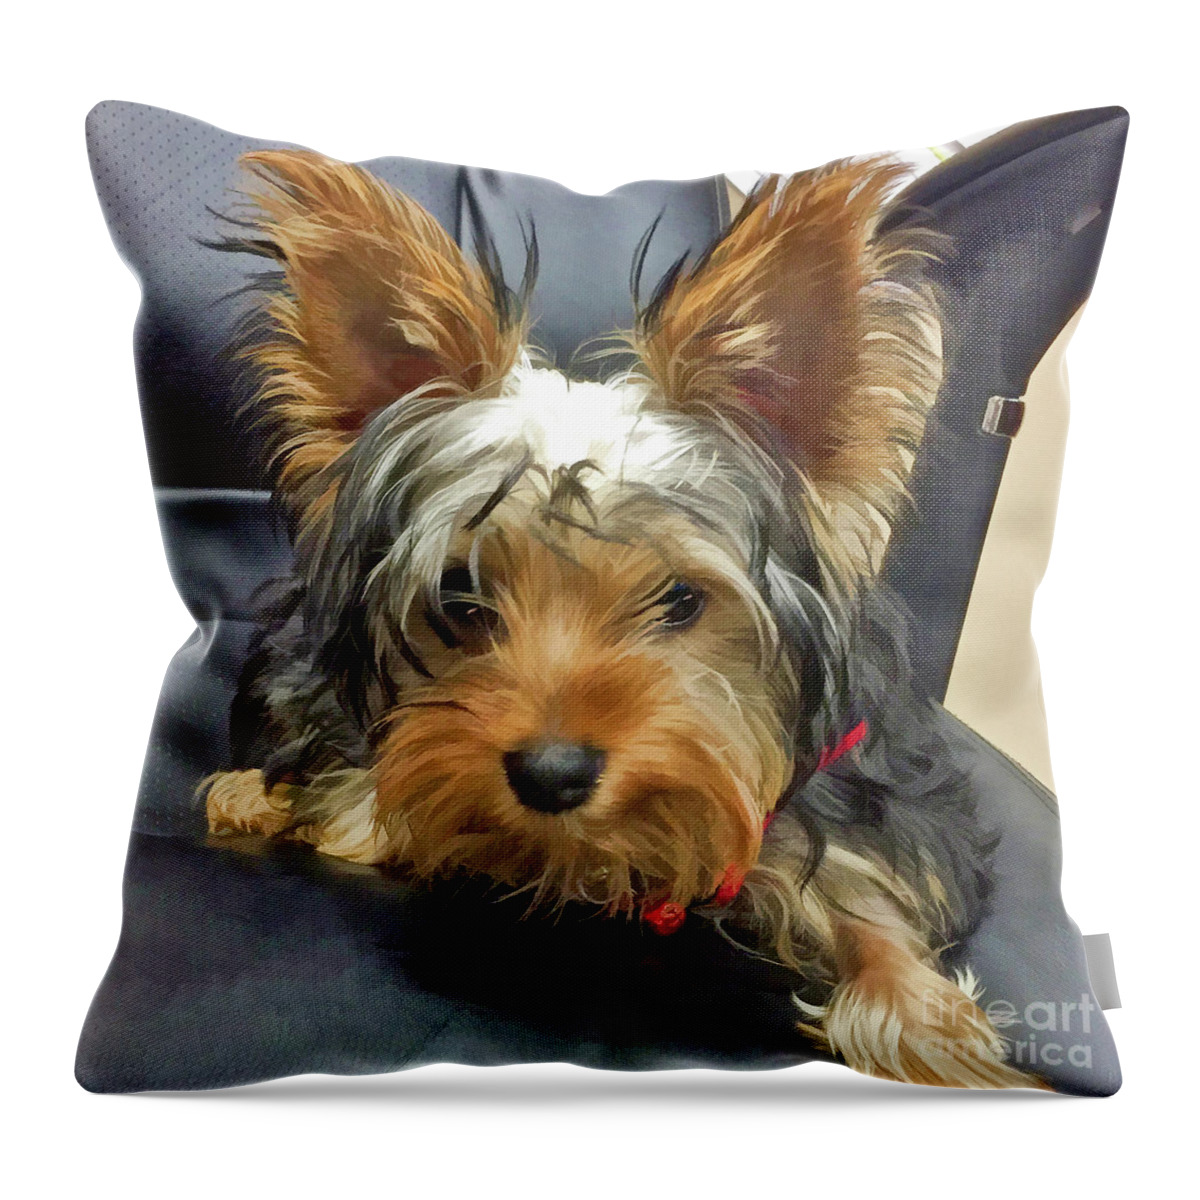 Yorkshire Terrier Throw Pillow featuring the photograph Yorkshire Terrier by Kathy Baccari